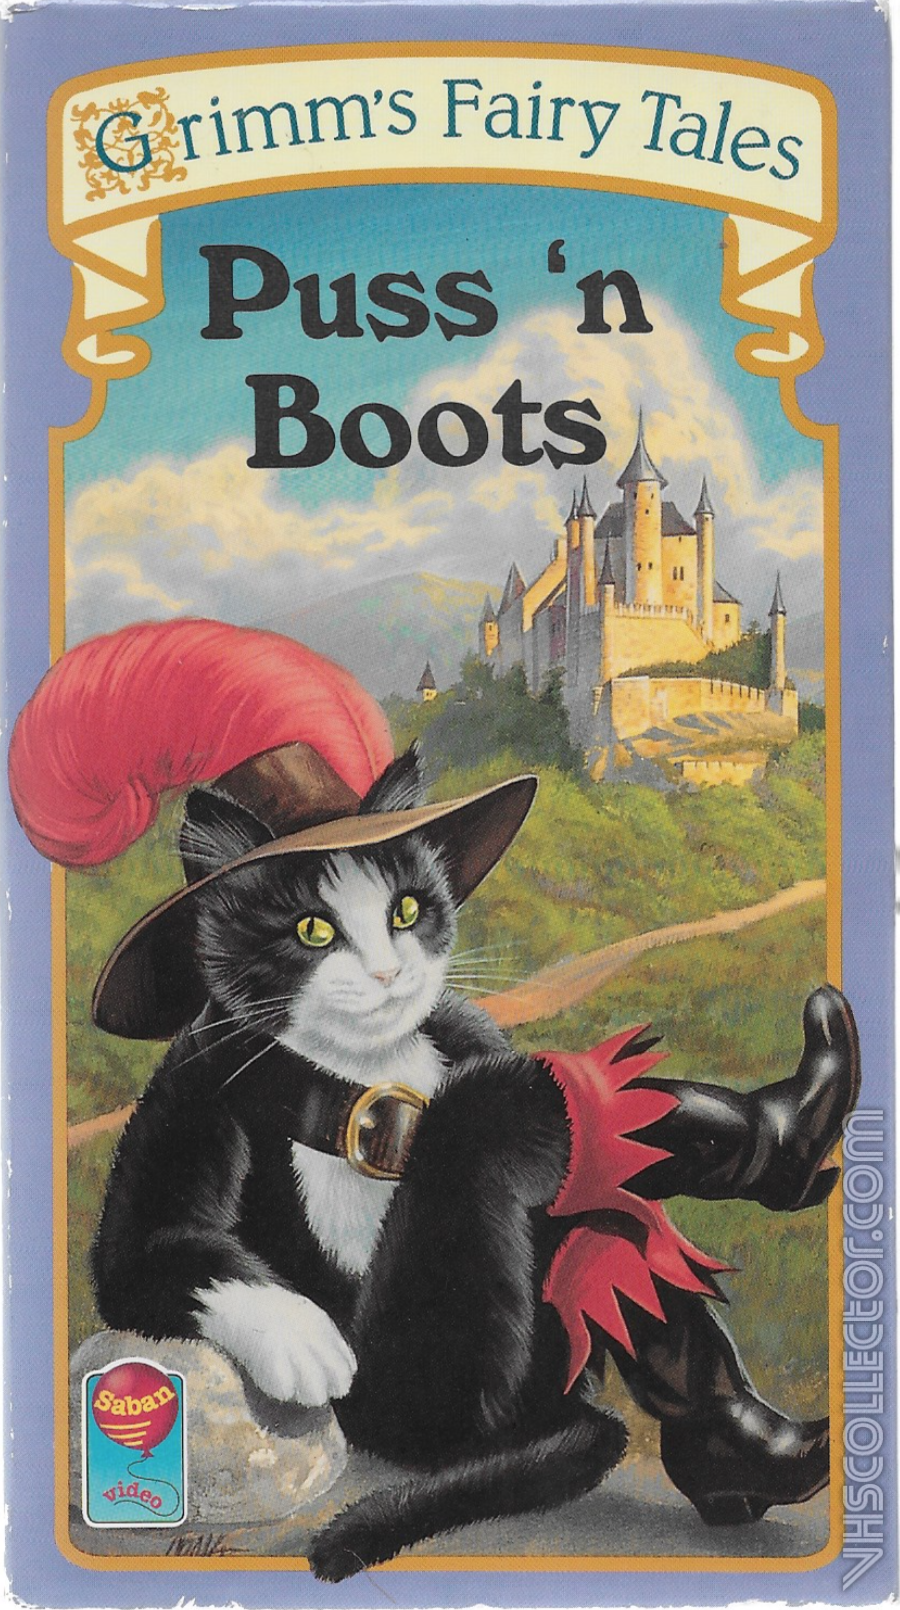 Grimm's Fairy Tales: Puss 'n Boots | VHSCollector.com